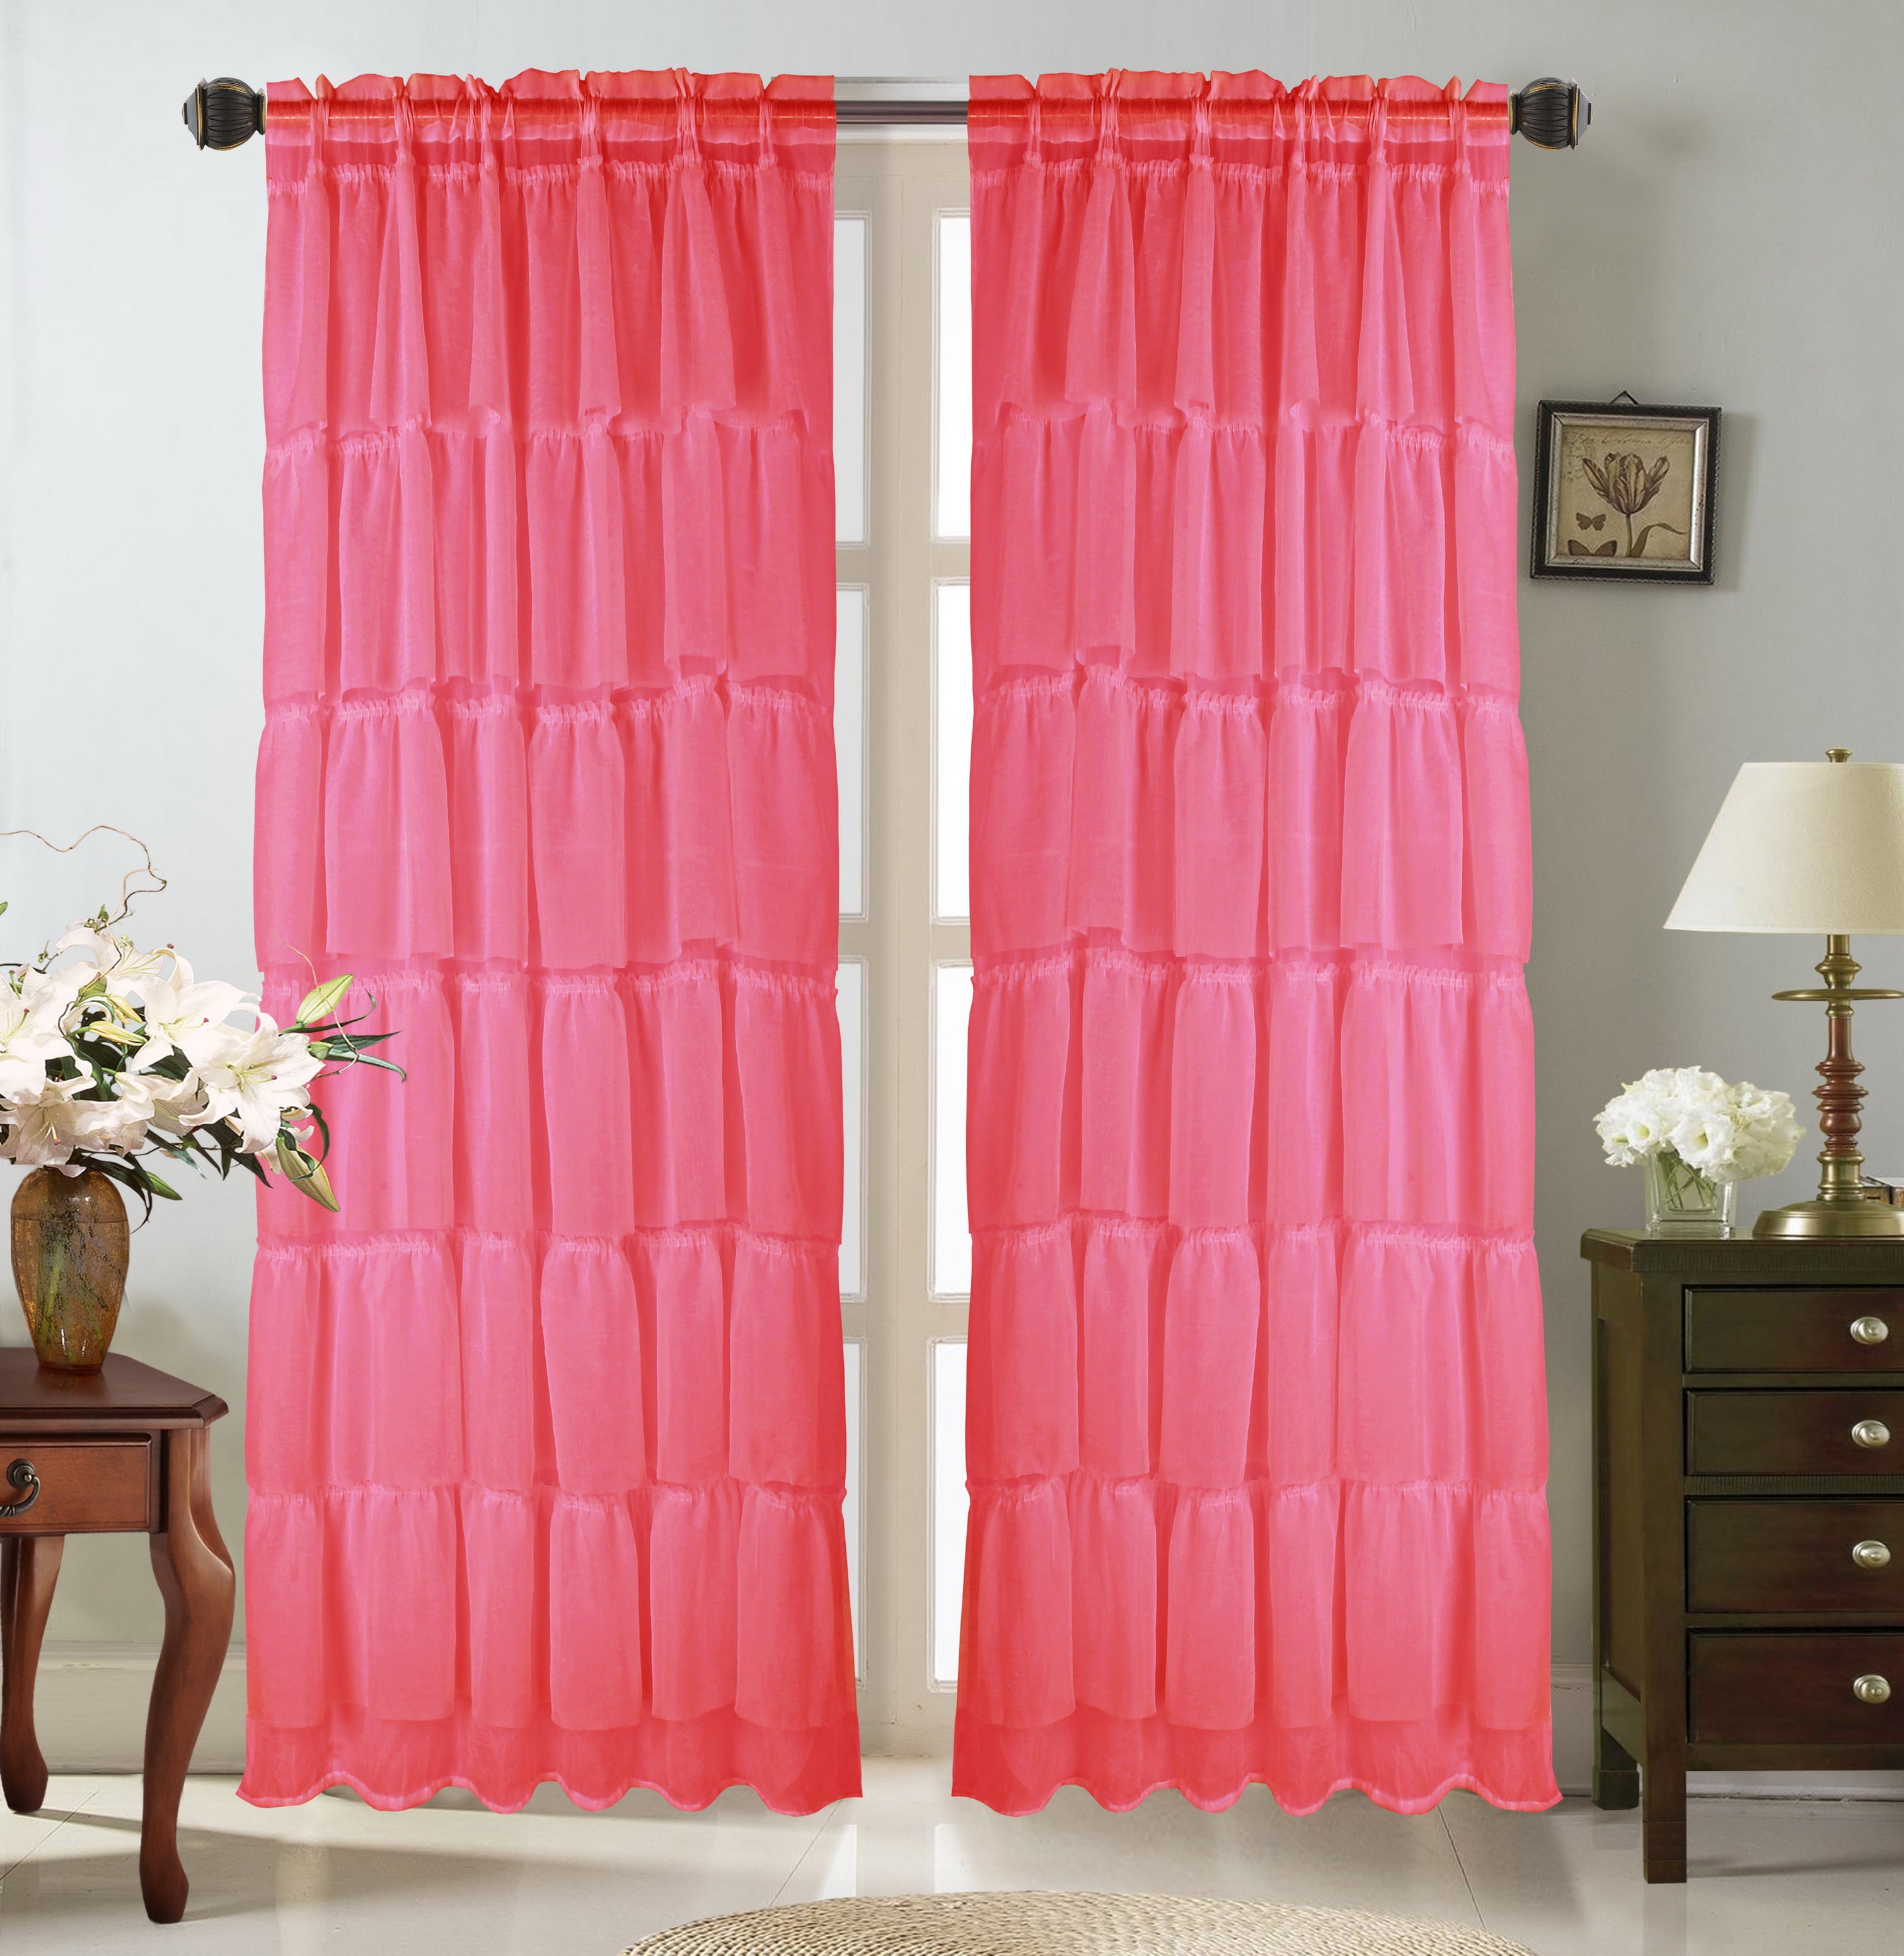 One Pieces Crushed Voile Sheer Gypsy Ruffle Window Curtains/panels Rod pocket 